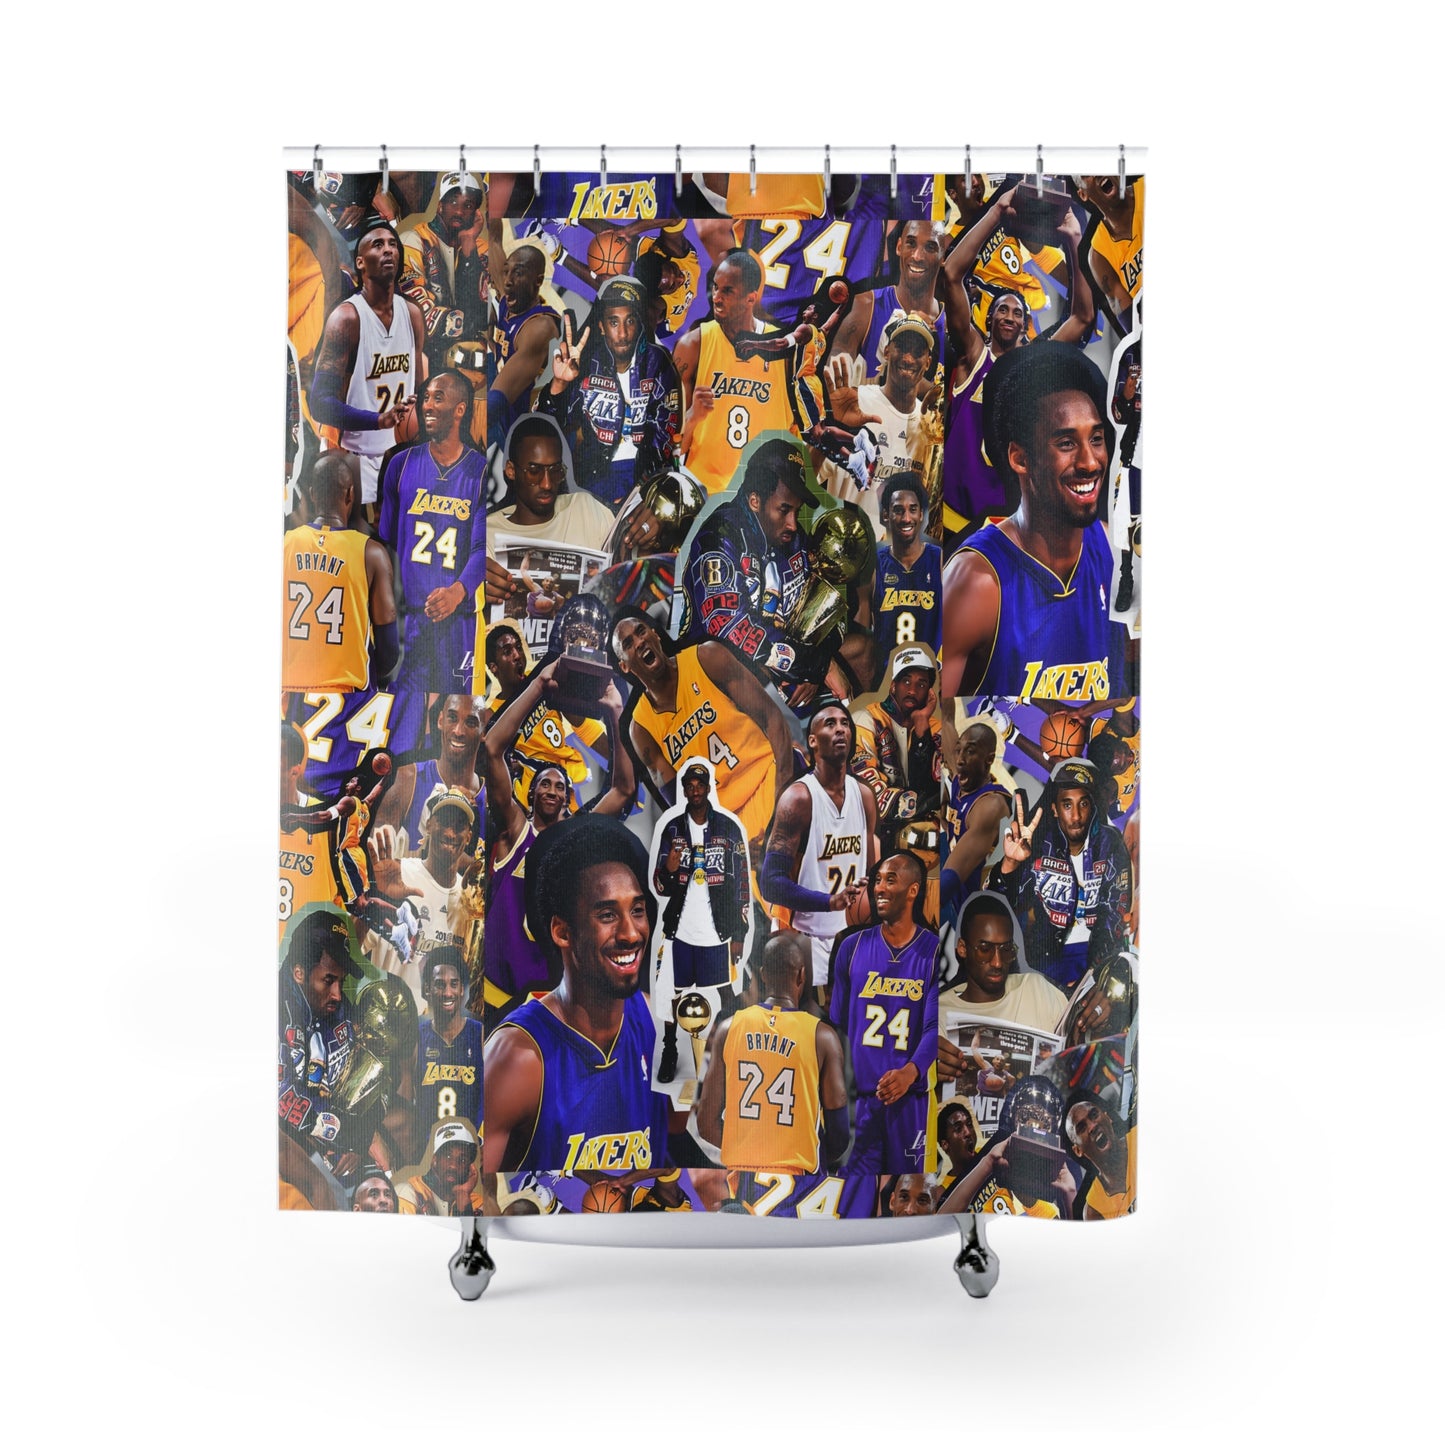 Kobe Bryant Career Moments Photo Collage Shower Curtain